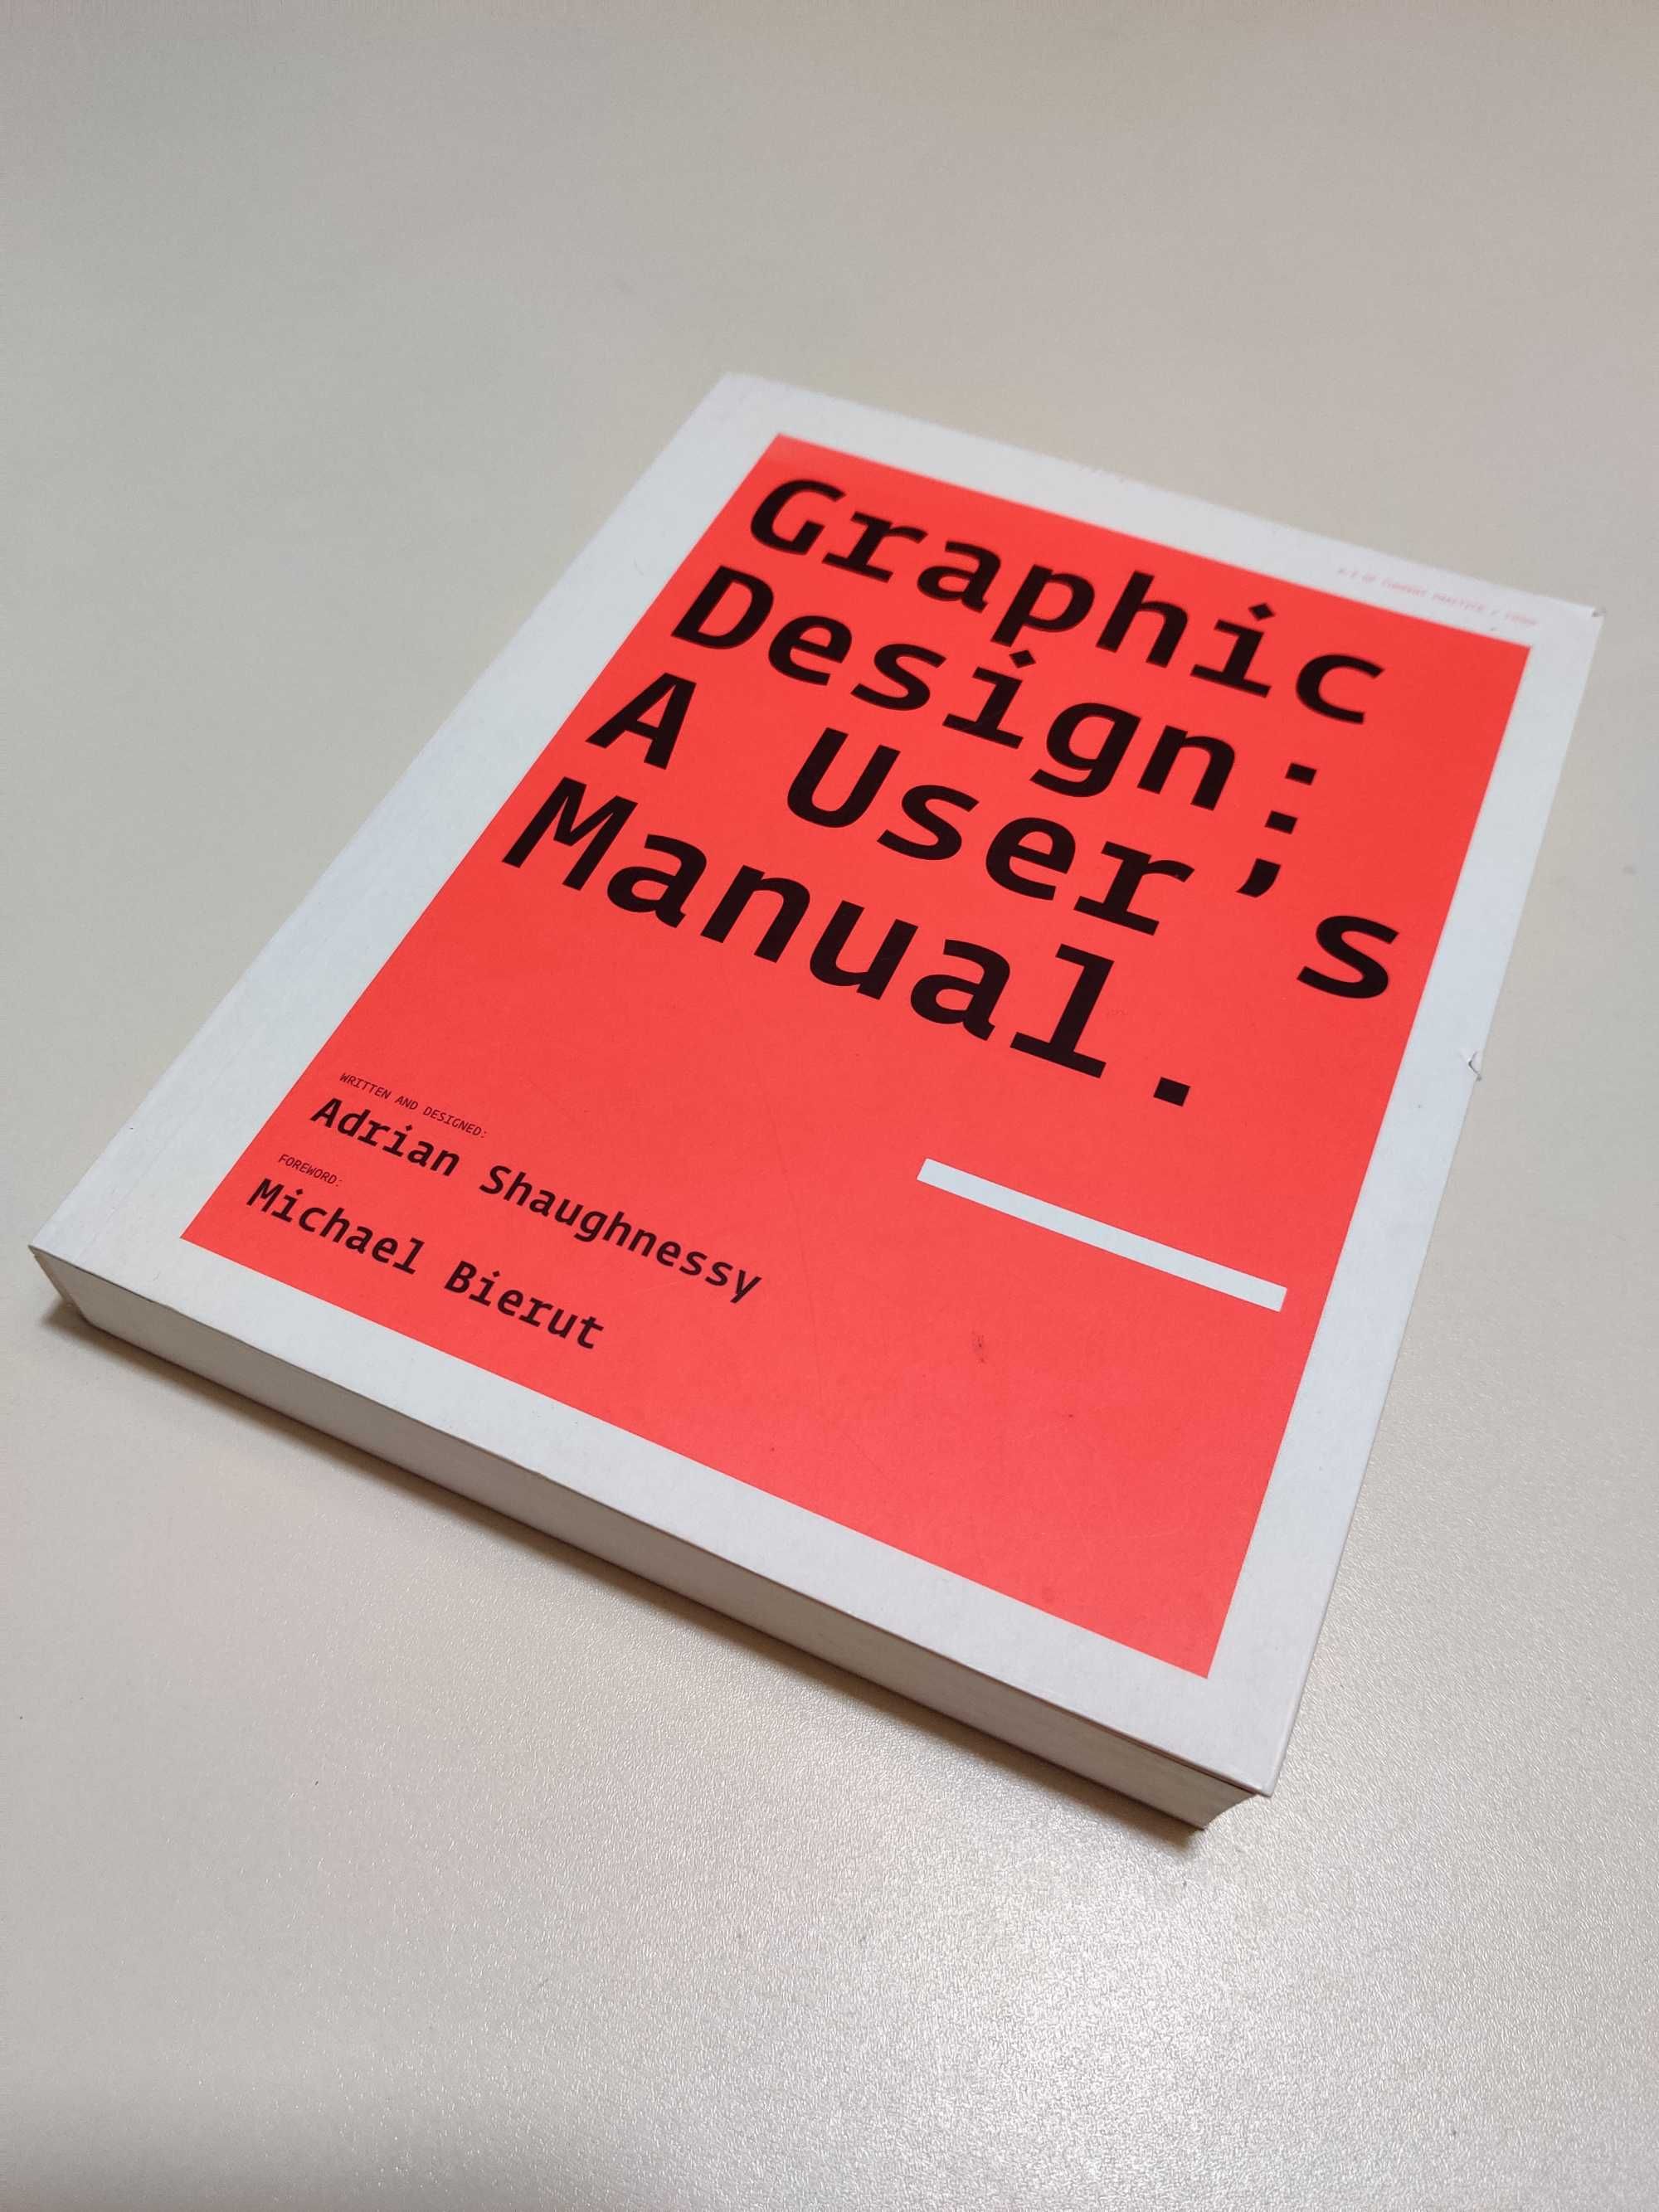 Livro: Graphic Design: A User's Manual by Adrian Shaughnessy